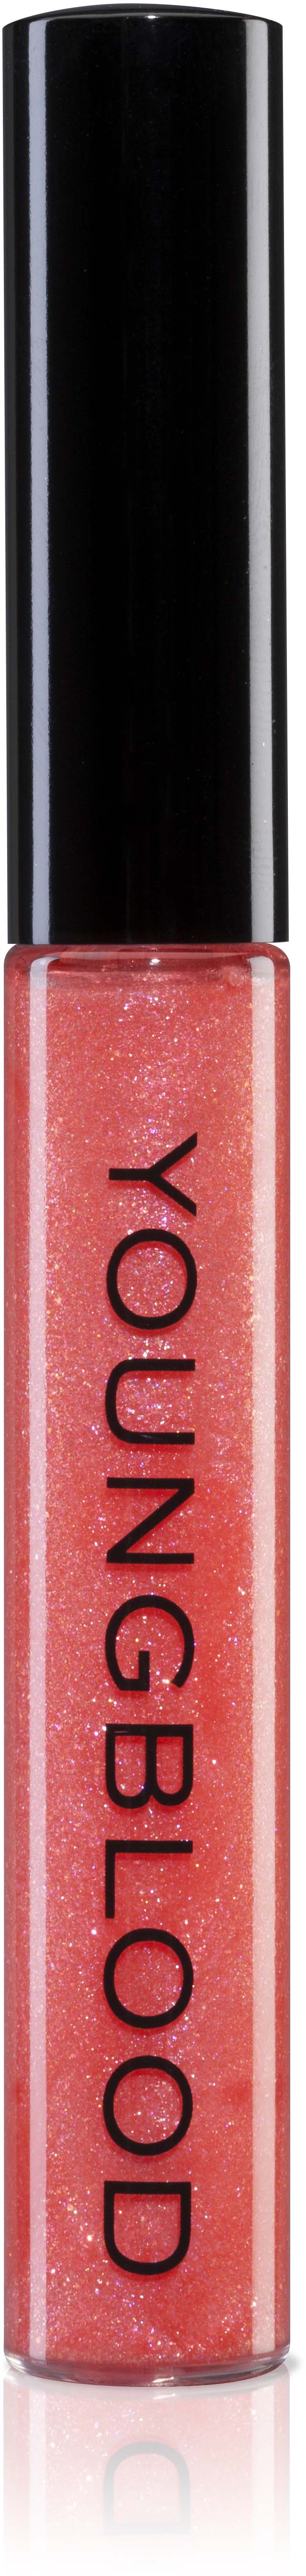 Youngblood Lipgloss 72 Coral Kiss